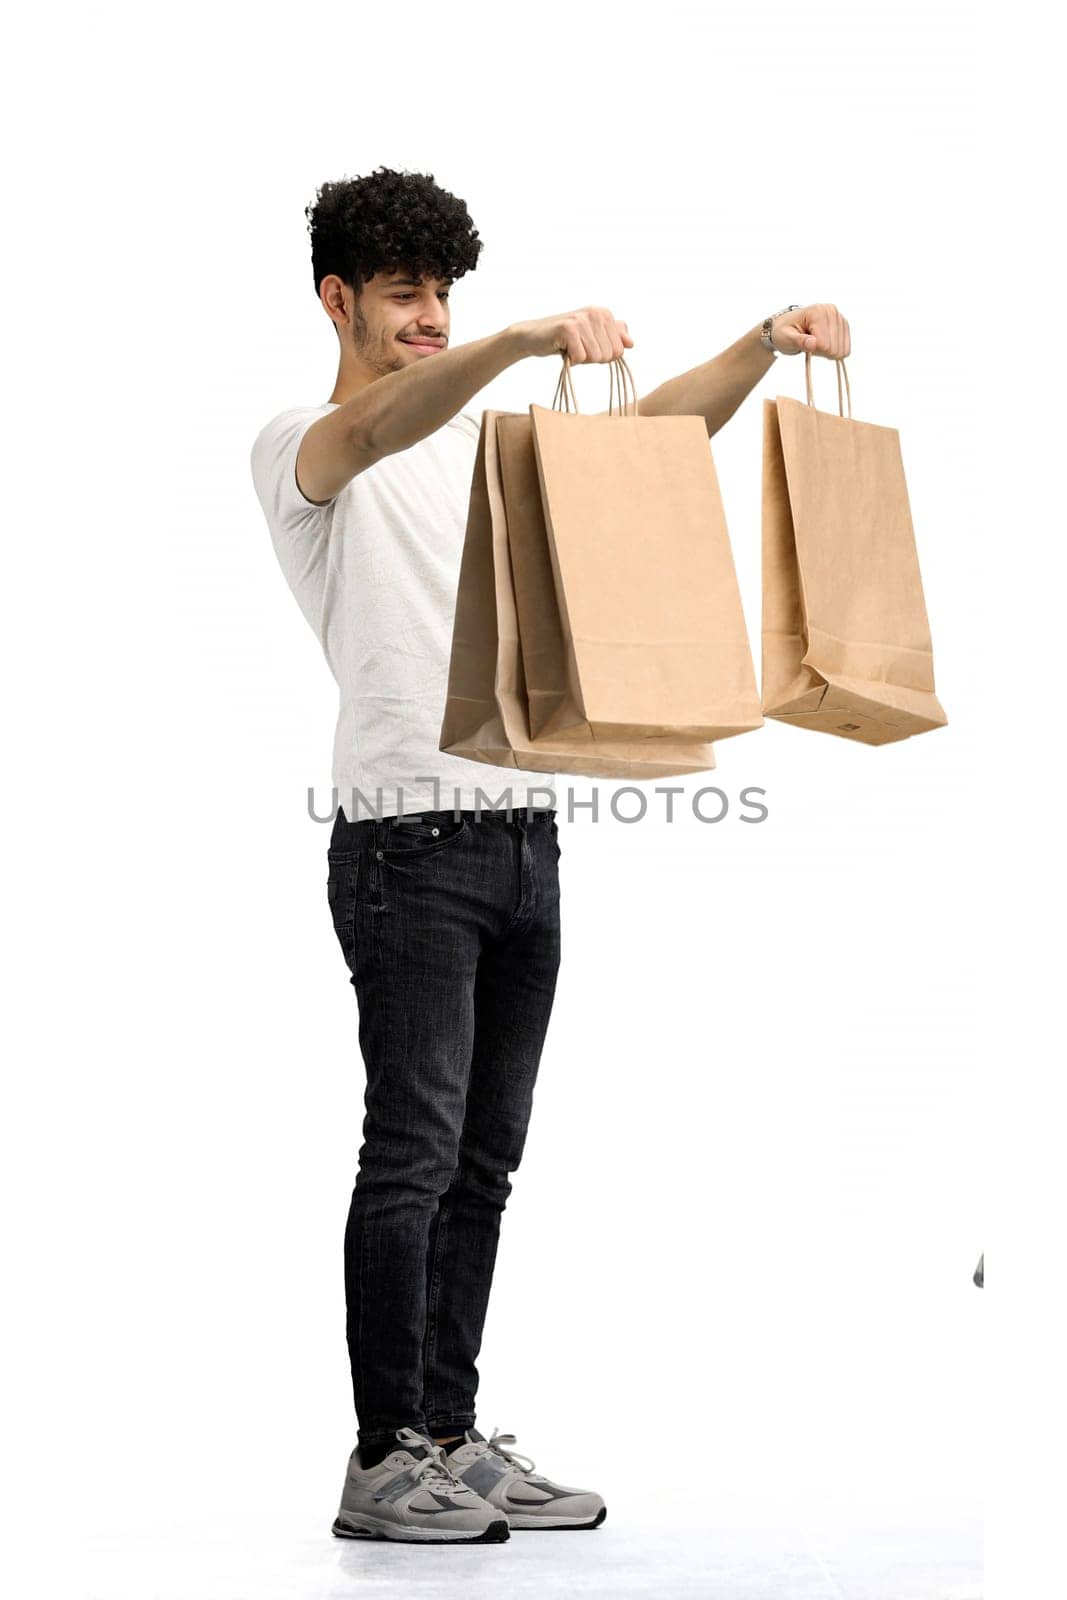 Man, on a white background, full-length, with bags by Prosto